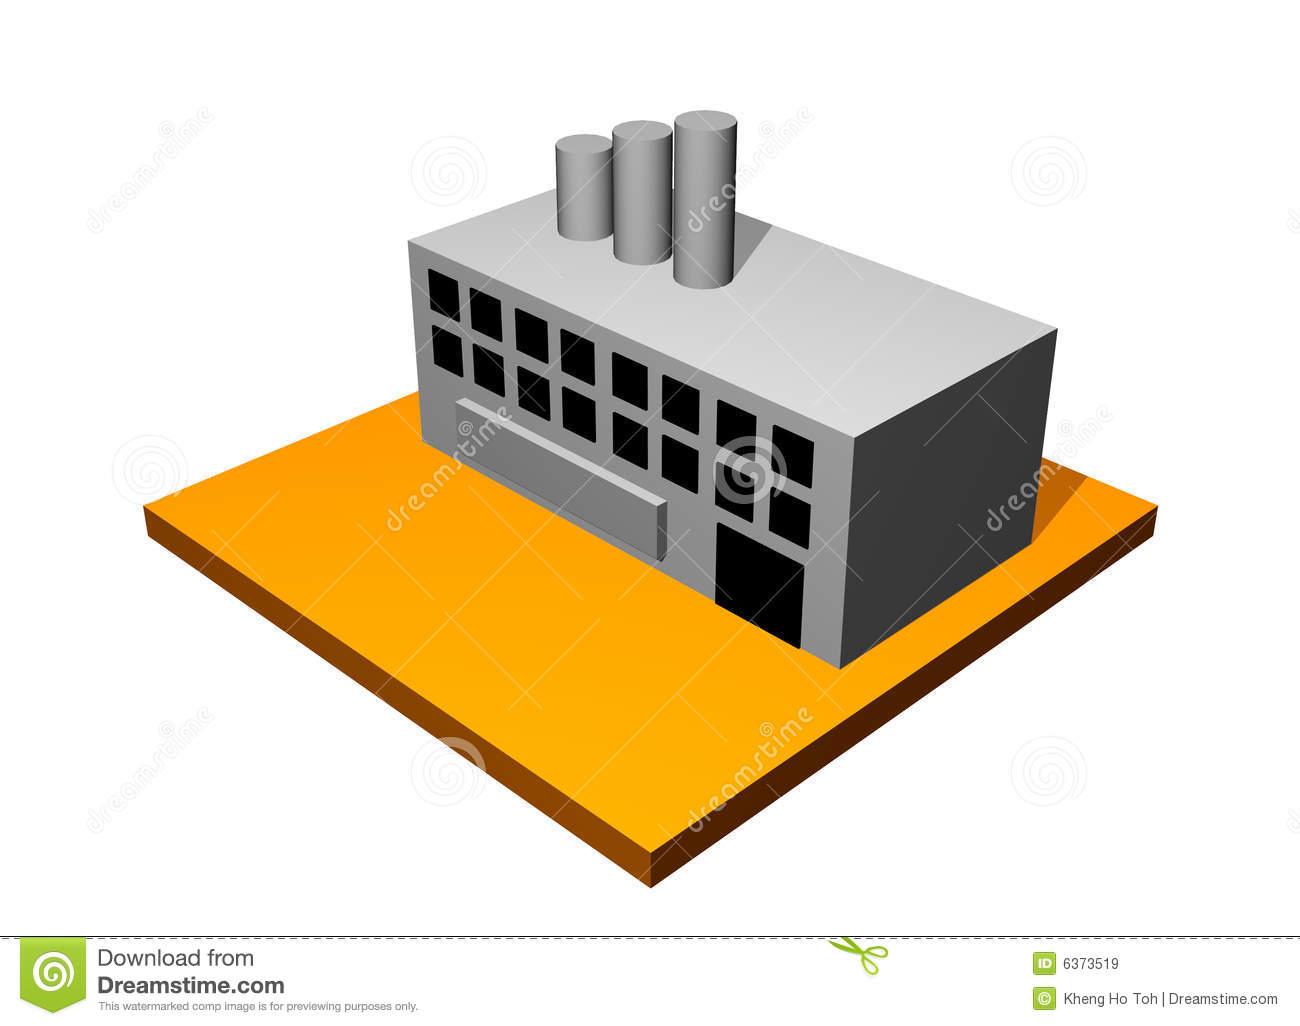 Factory Industrial Building Royalty Free Stock Images   Image  6373519